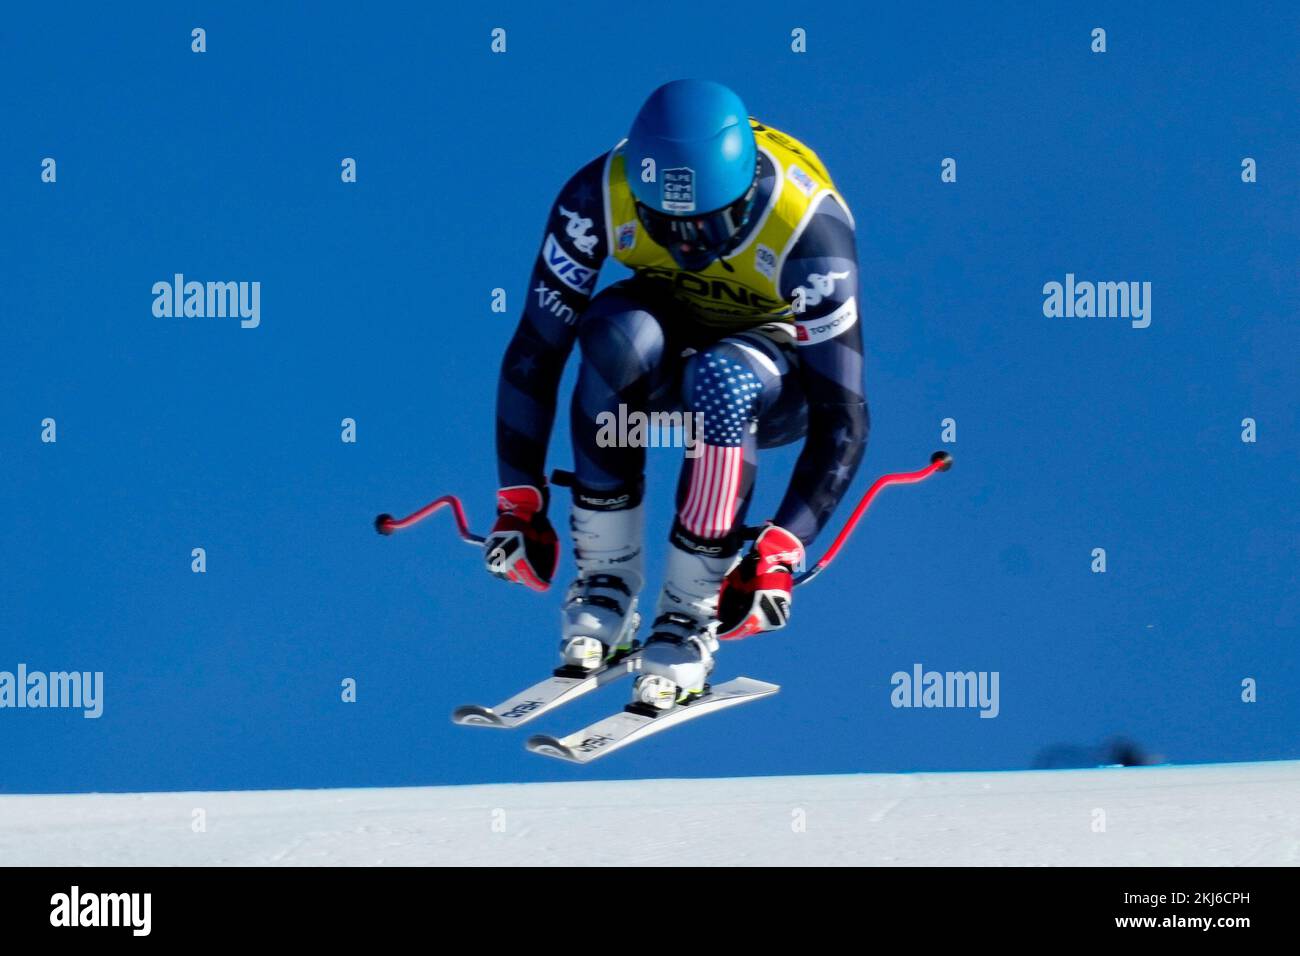 November 24, 2022, Lake Louise, AB, CANADA Ryan Cochrane-Siegle, of the United States, skis down the hill during practice runs for the FIS Alpine Skiing World Cup, in Lake Louise, Alta., Thursday,